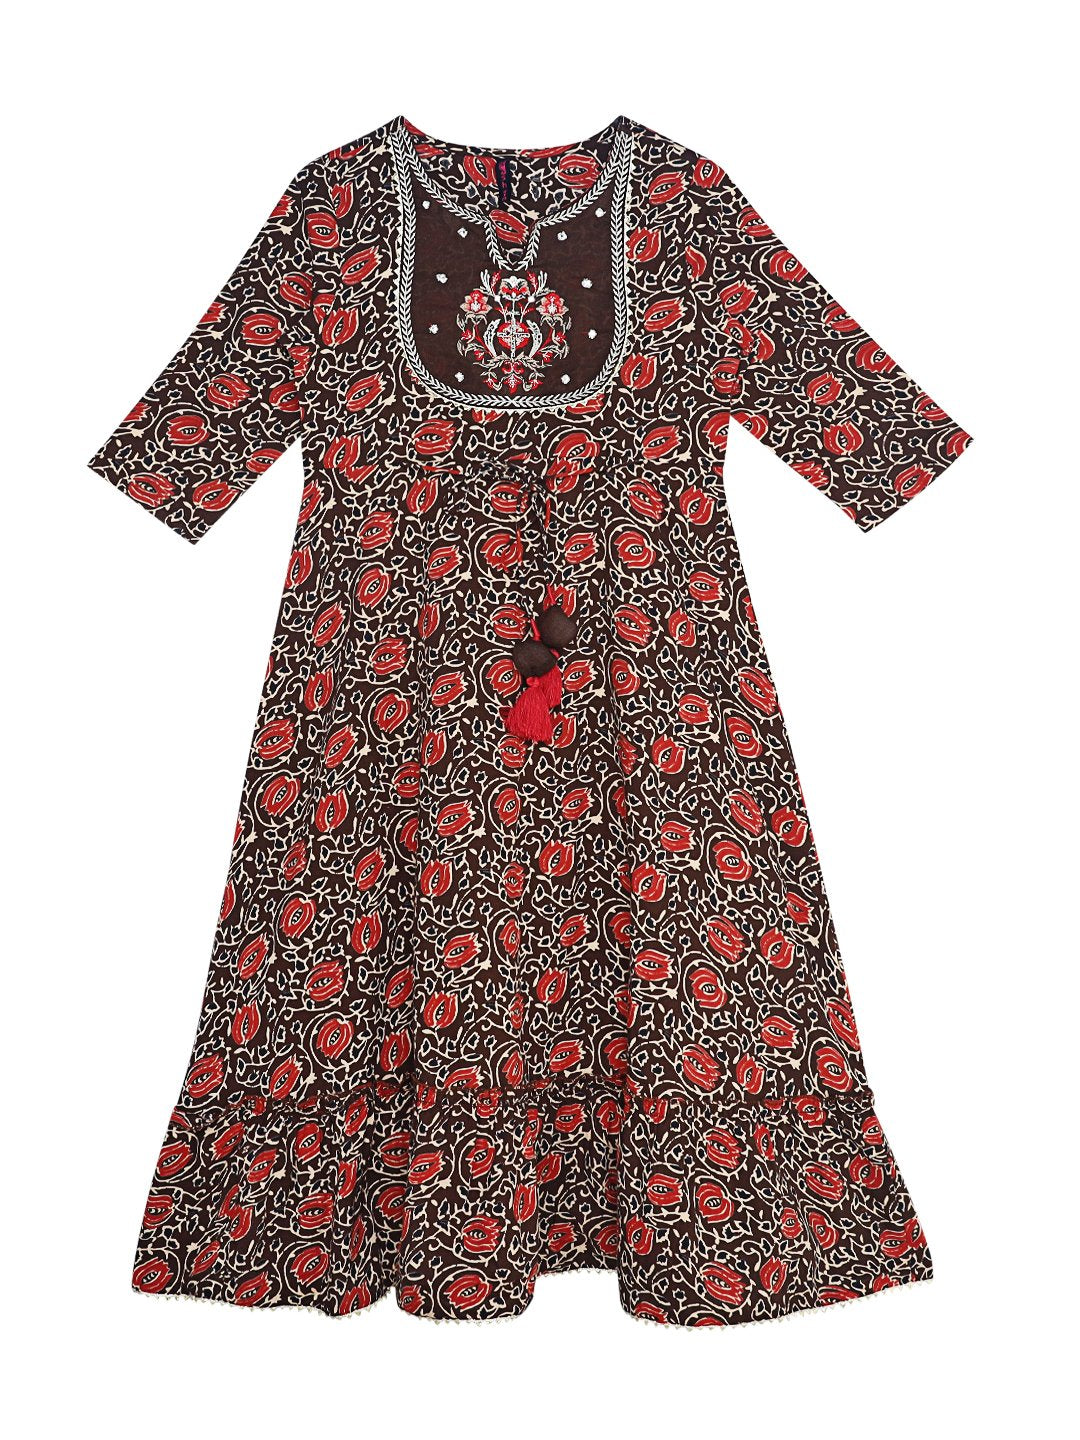 Ishin Girls Brown Floral Embroidered Tiered Dress